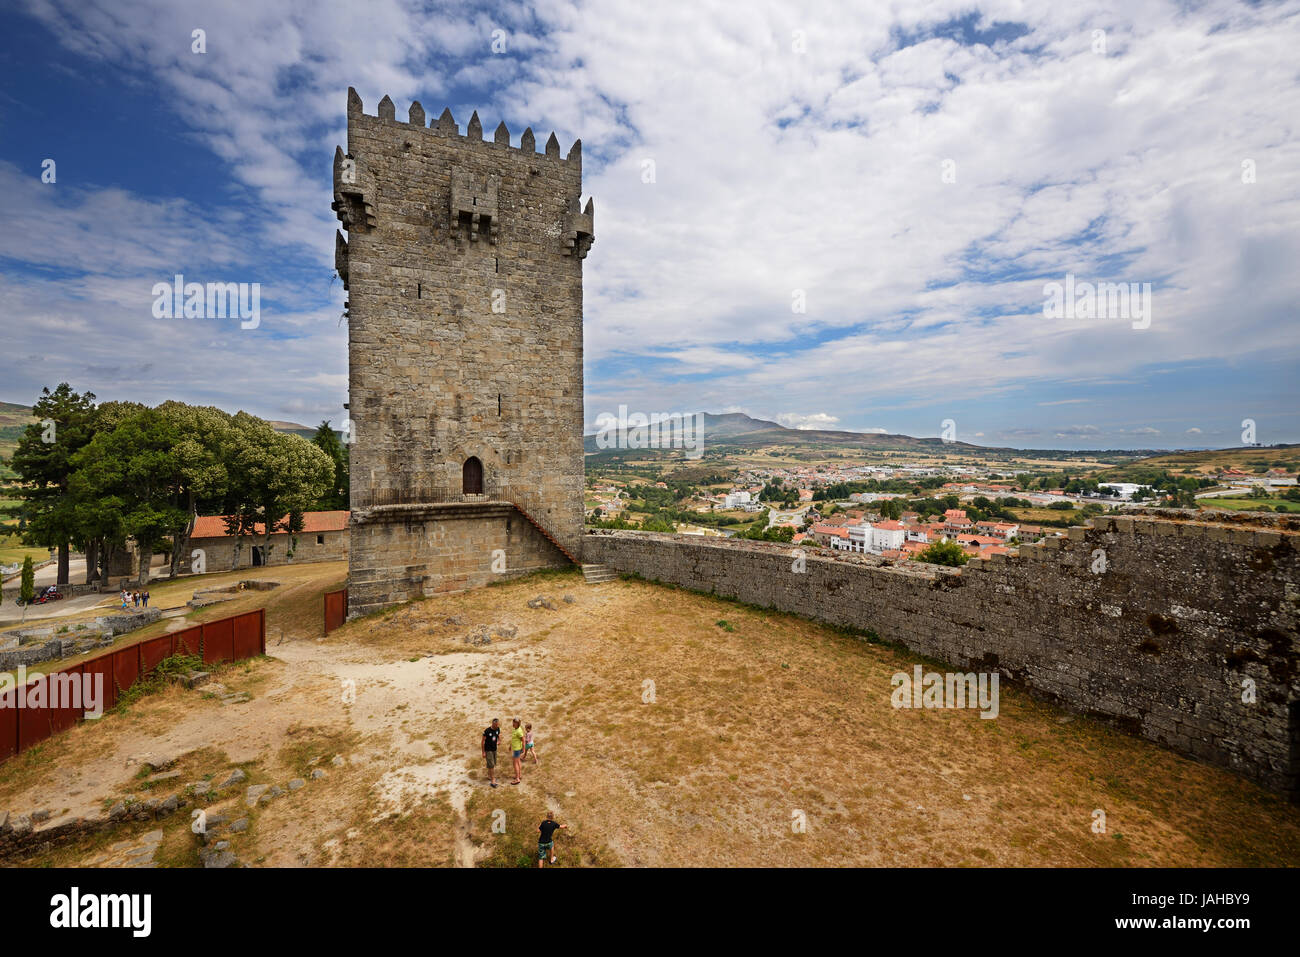 The medieval castle of Montalegre, dating from the 13th century. Trás-os-Montes, Portugal Stock Photo